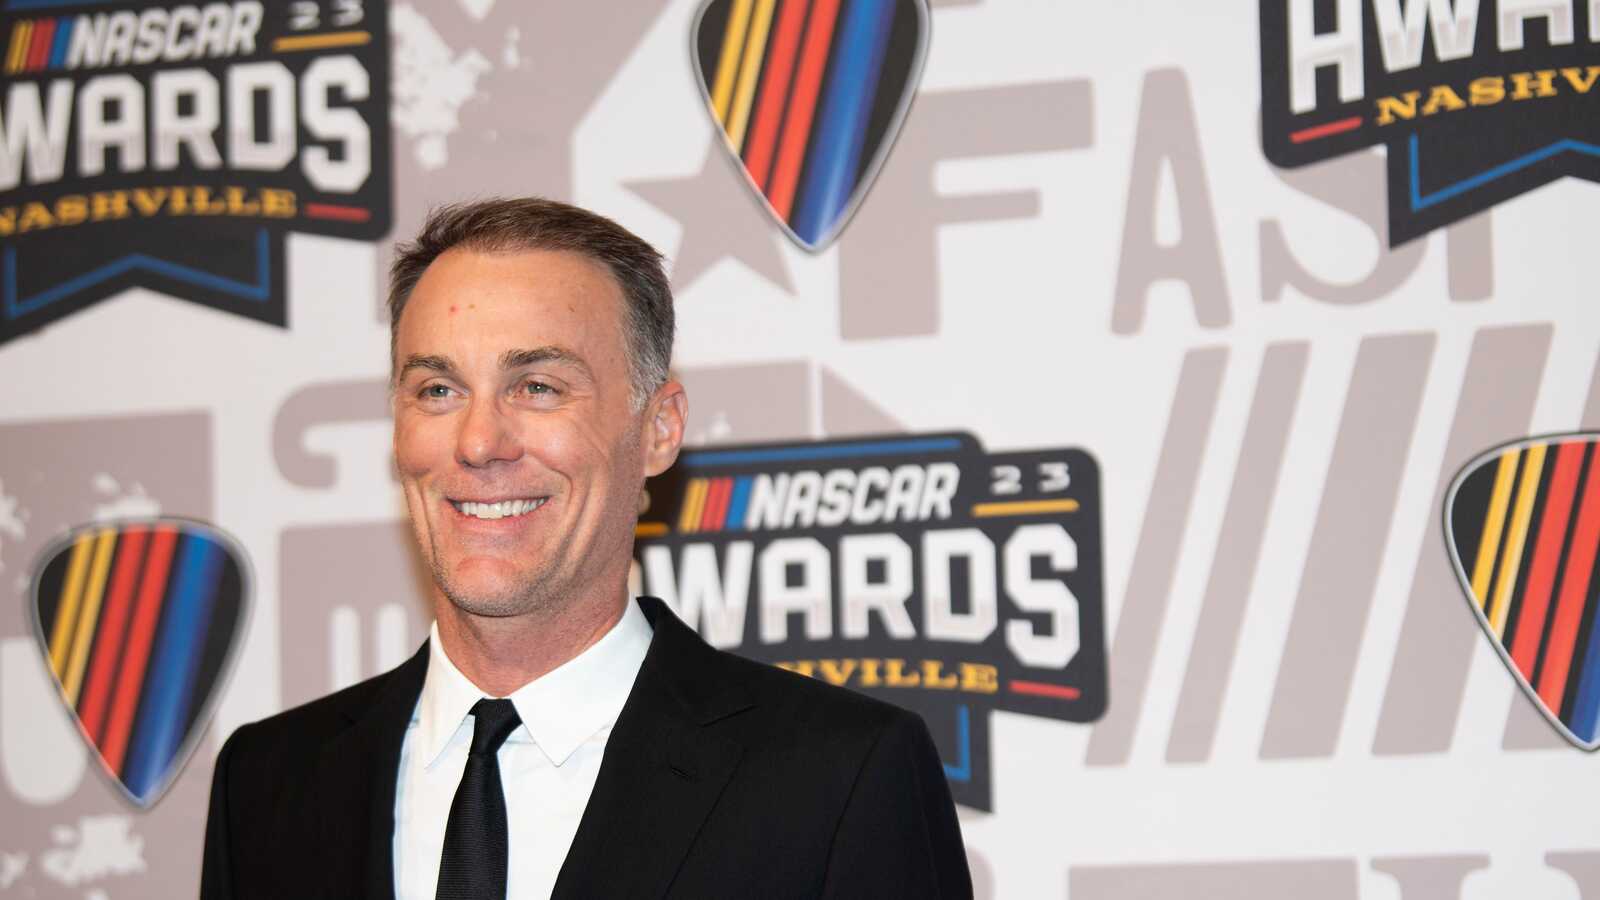 Kevin Harvick claims Kyle Busch is 'frustrated' over RCR’s failure to capitalize on Talladega